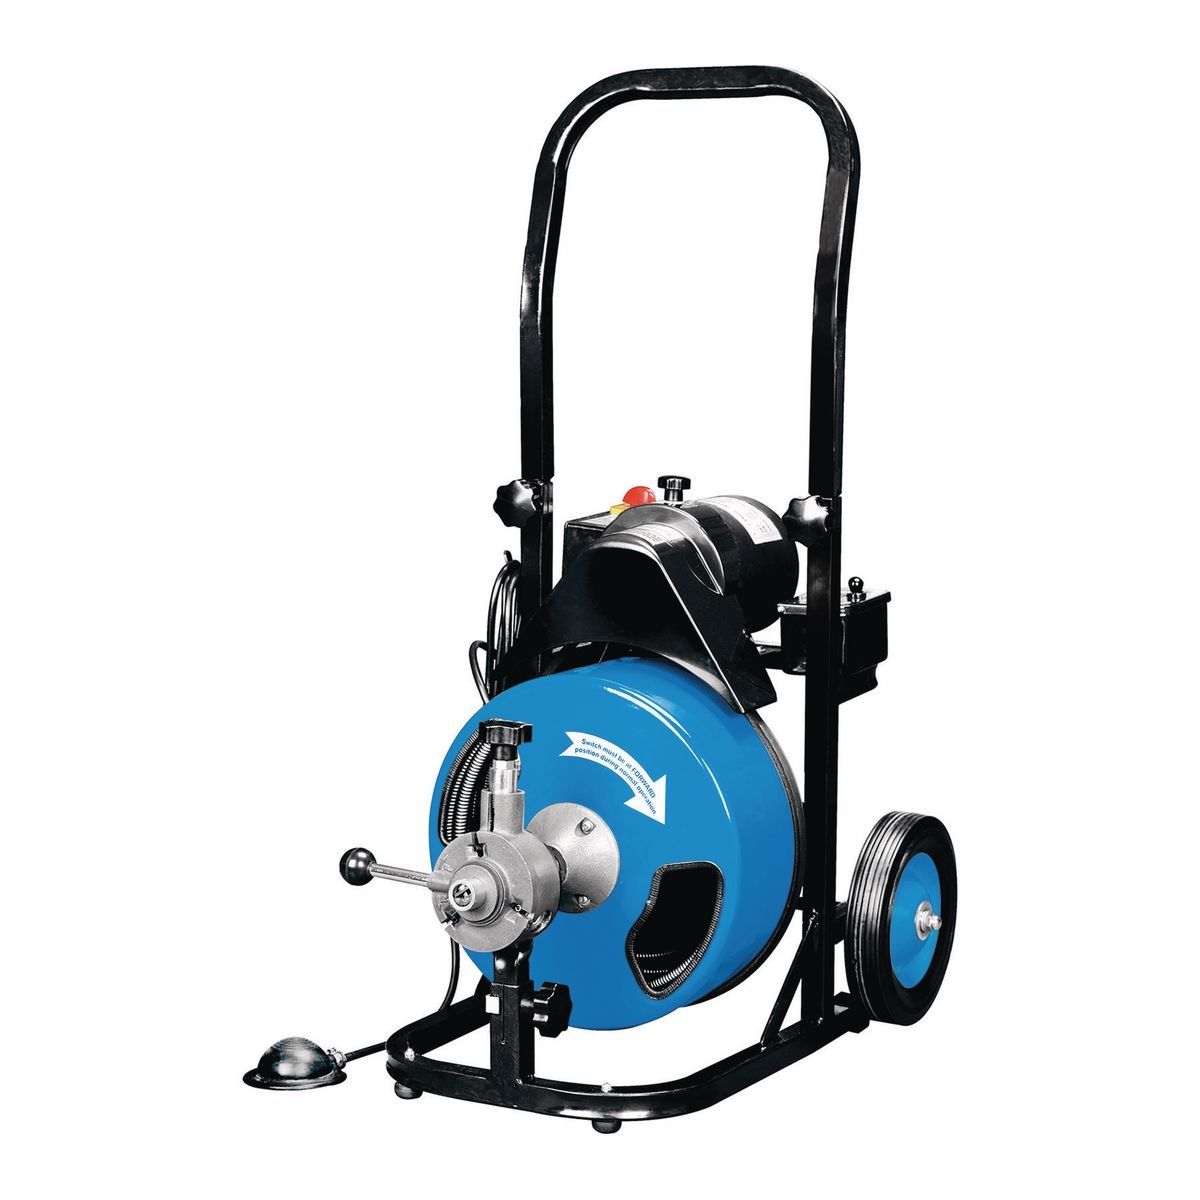 HYDROSTAR DRAINMONSTER 50 ft. Power-Feed Drain Cleaner with GFCI